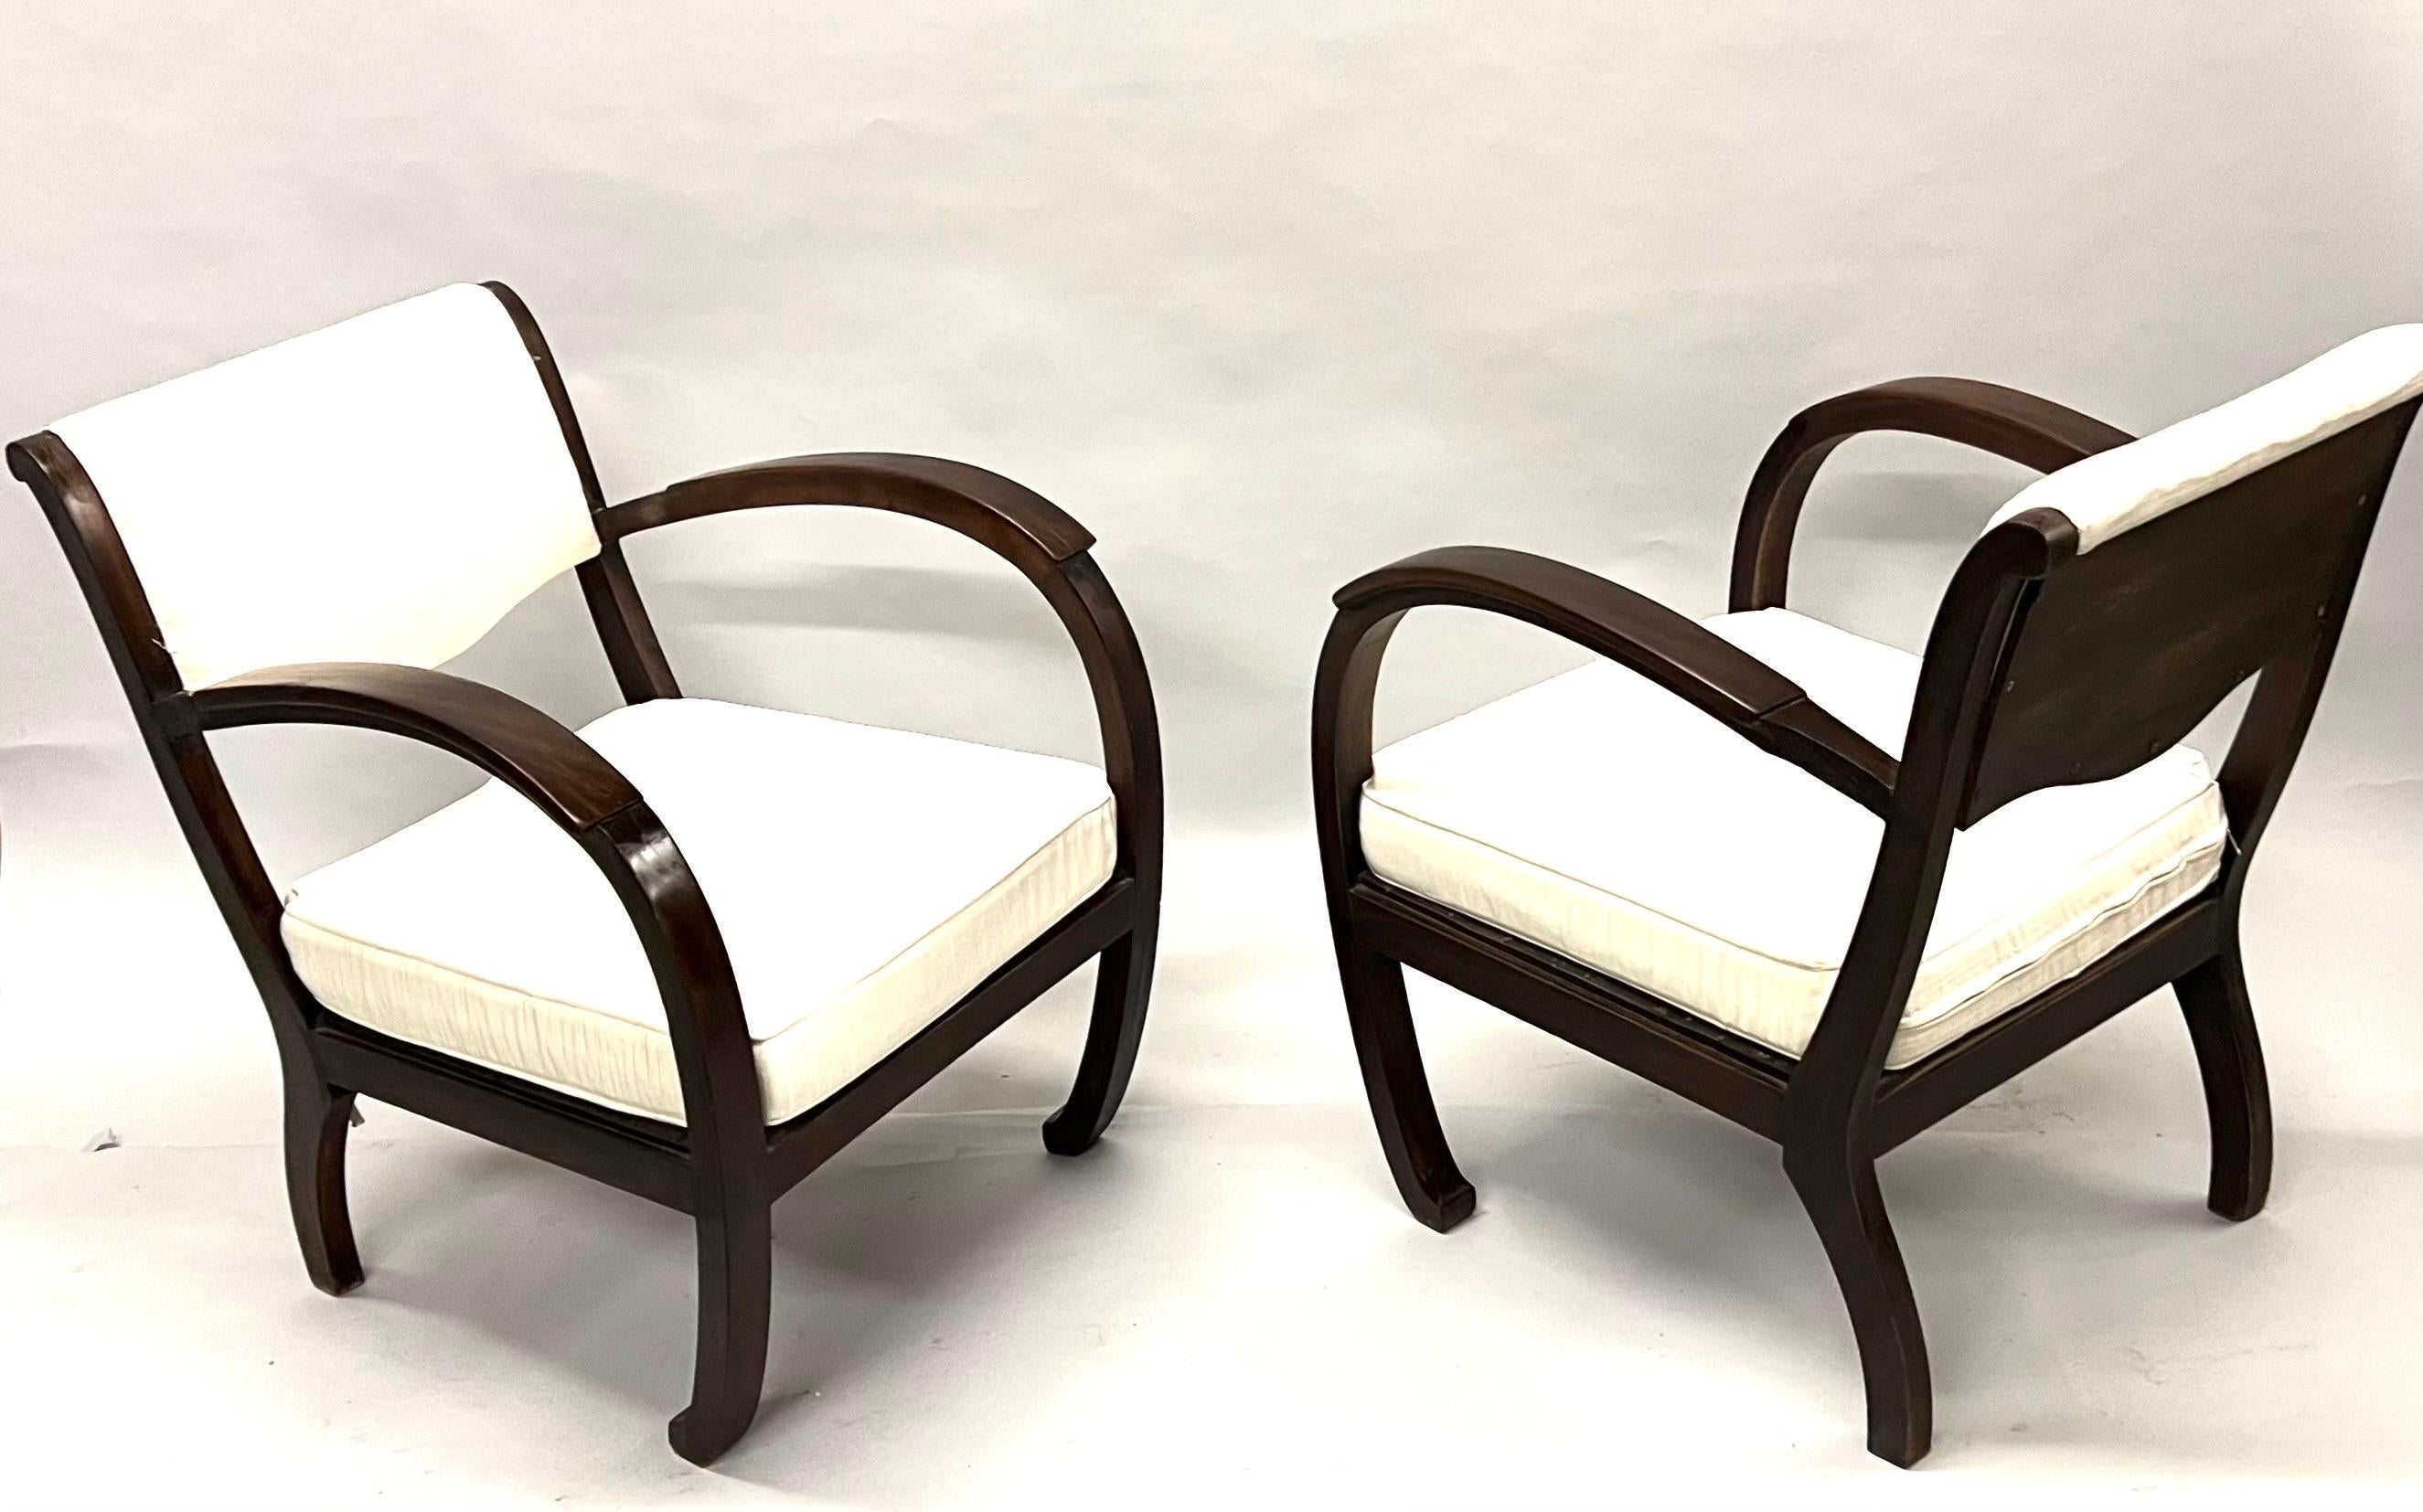 Hand-Carved Rare French Art Deco Hand Carved Teak Armchairs/ Lounge Chairs, 1920-30 For Sale